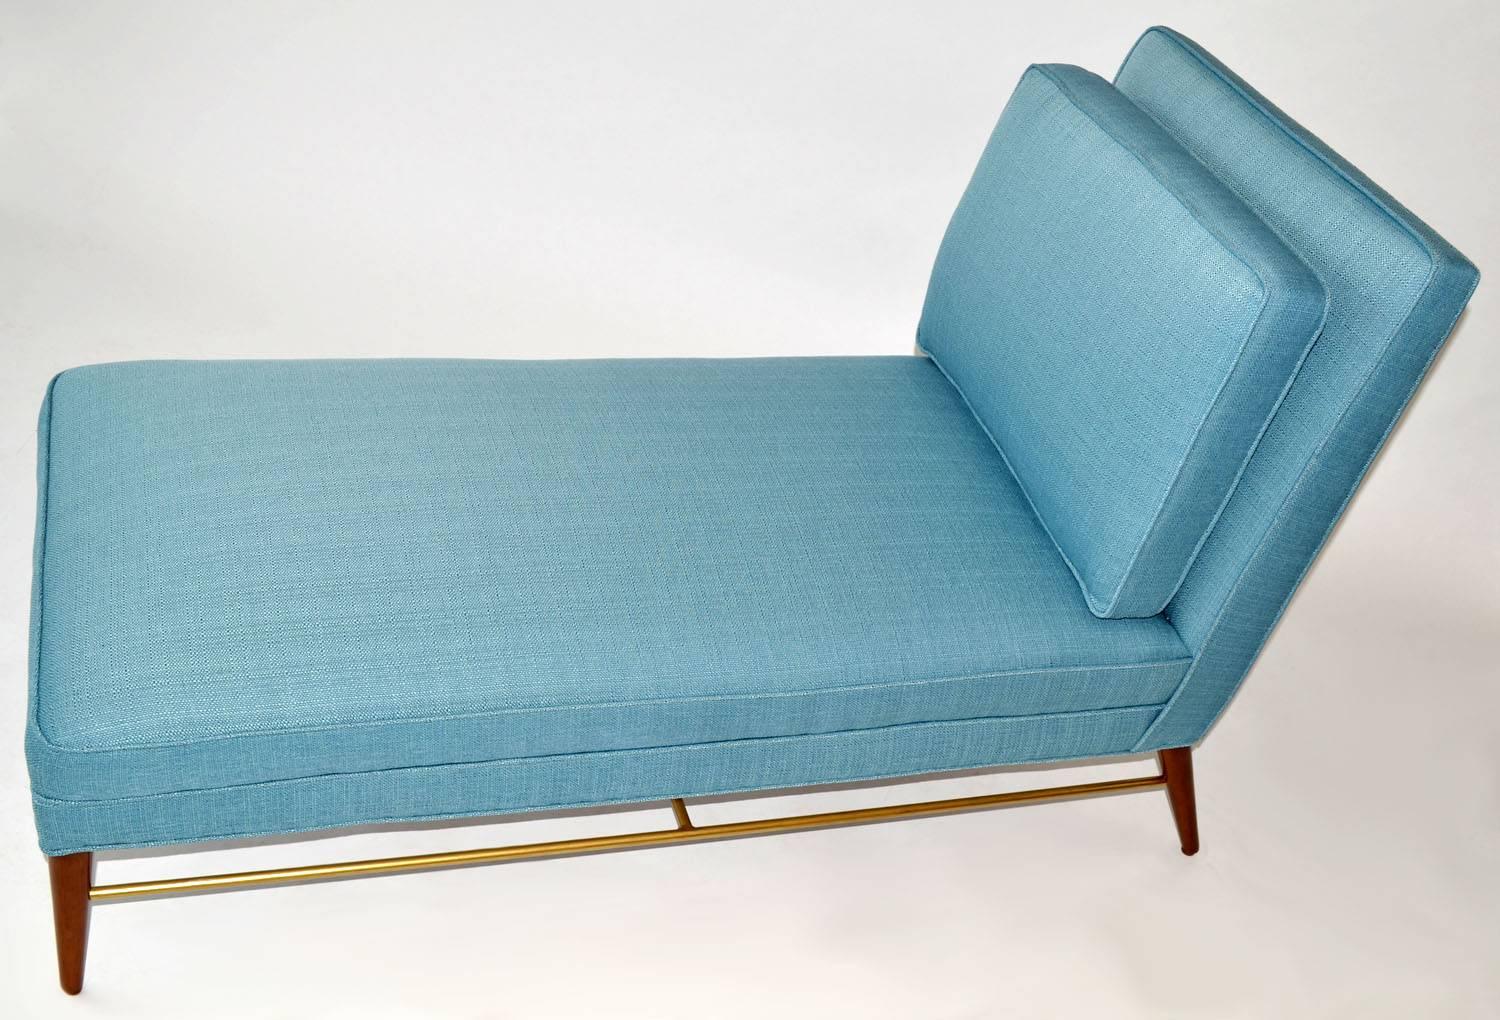 Chaise longue / longue with back pillow by Paul McCobb for Calvin Furniture, 1950s American mid-century modern. Completely professionally restored. Walnut, brass, upholstery.